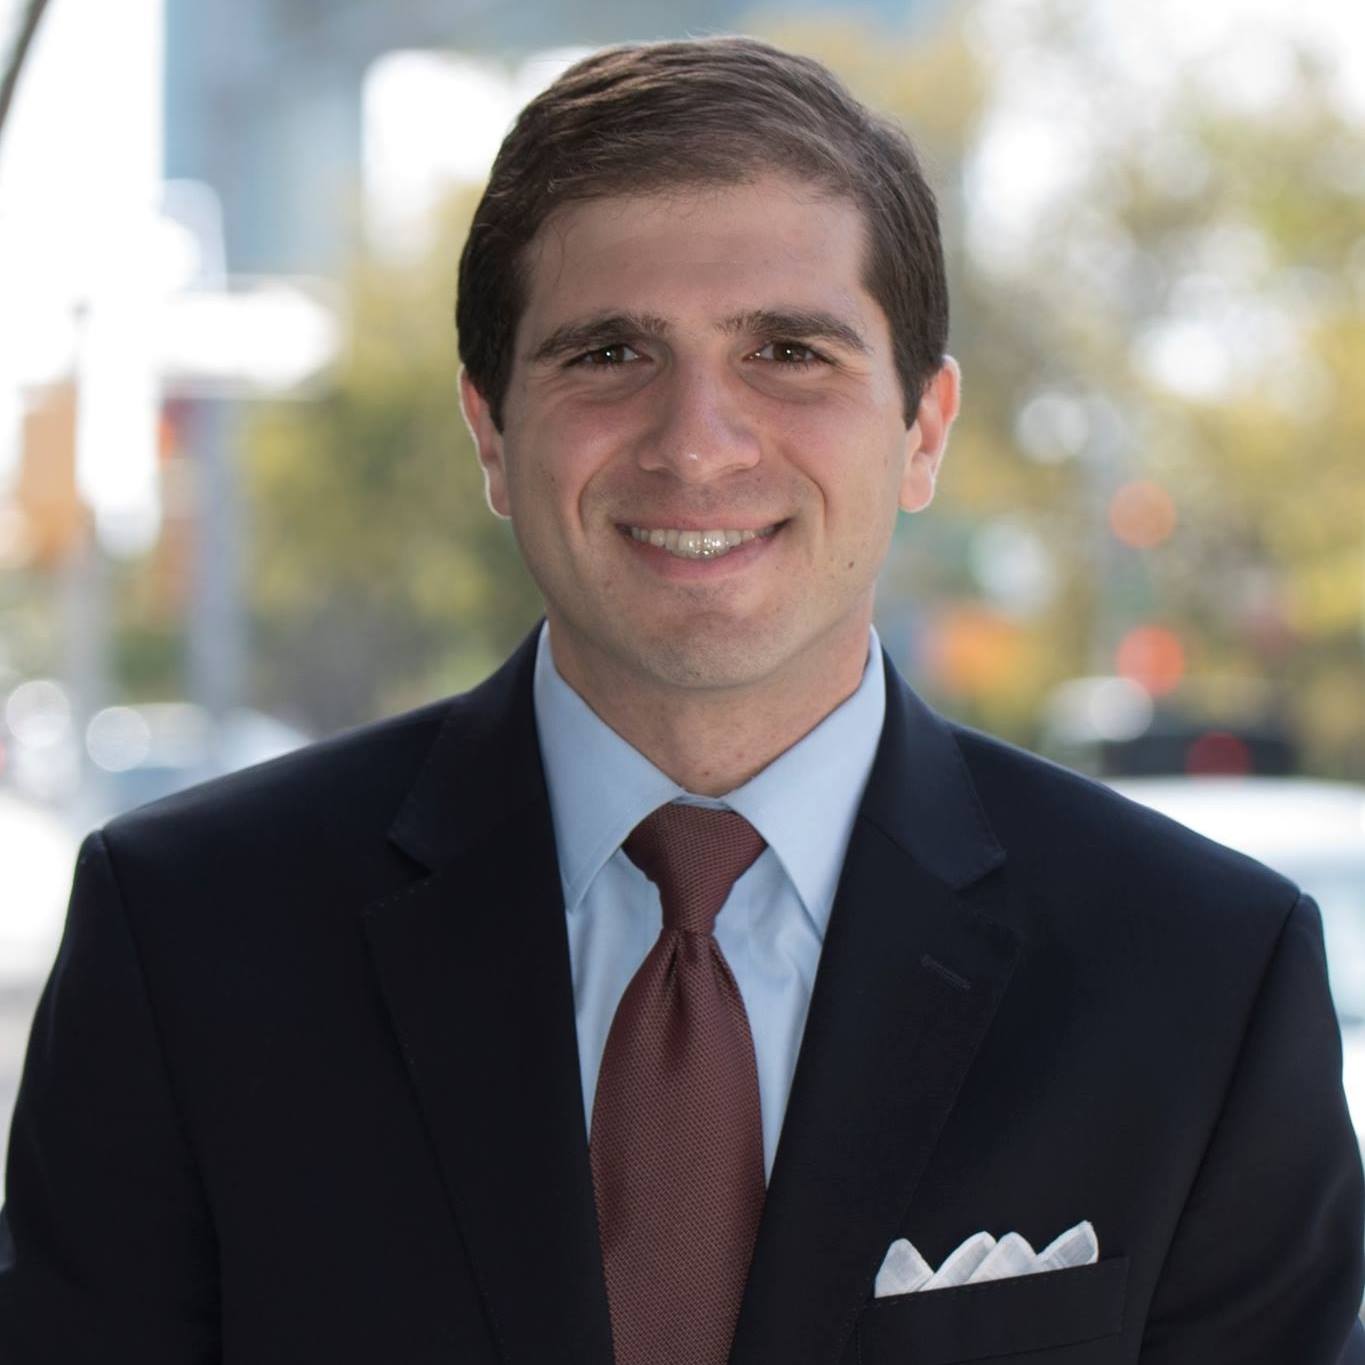 Q&A With Andrew Gounardes – Democrat for the 22nd Senate Seat